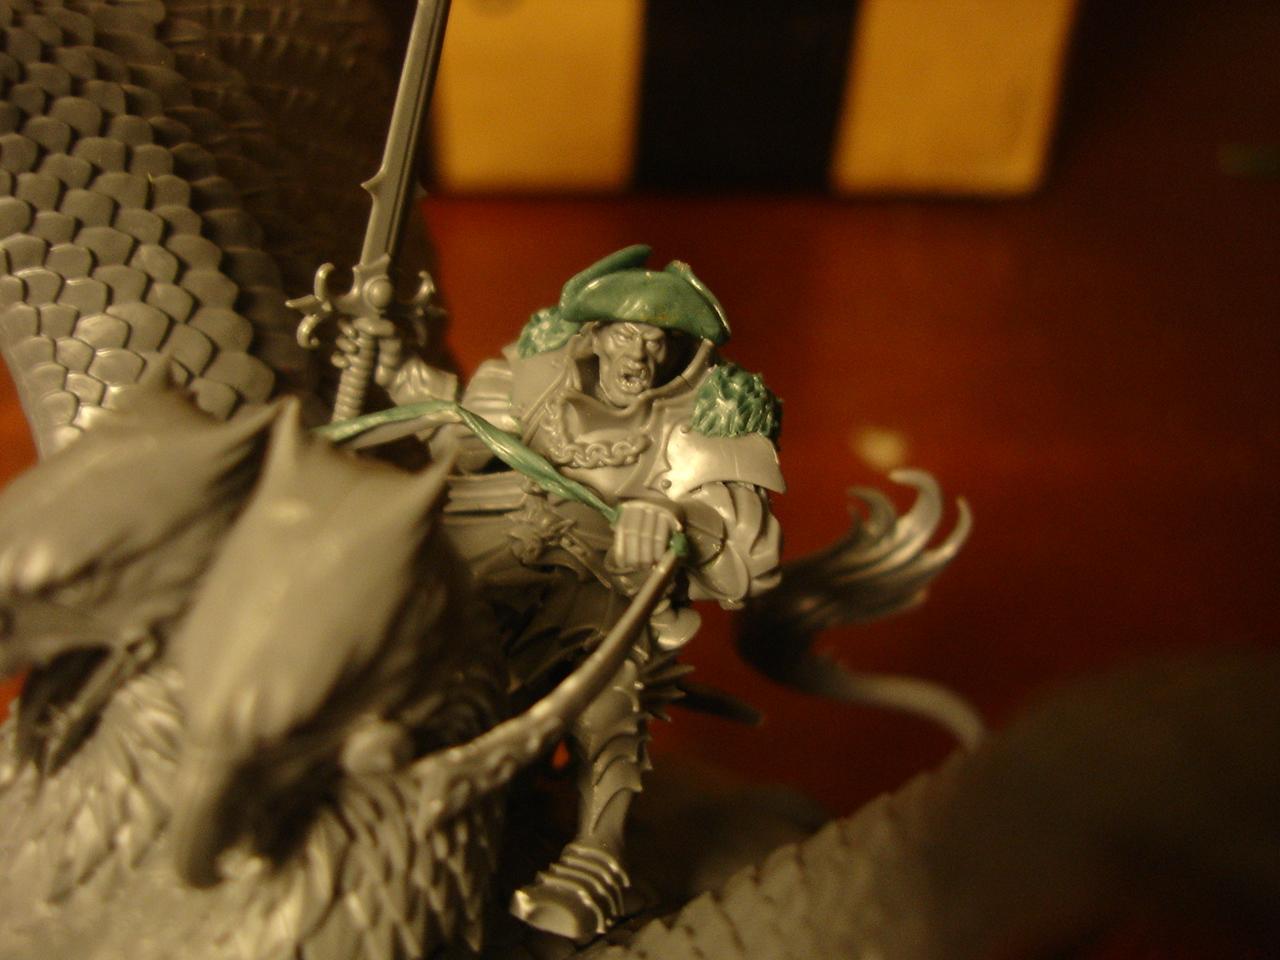 Luthor Harkon the Commodore - zombie pirate lord on dragon